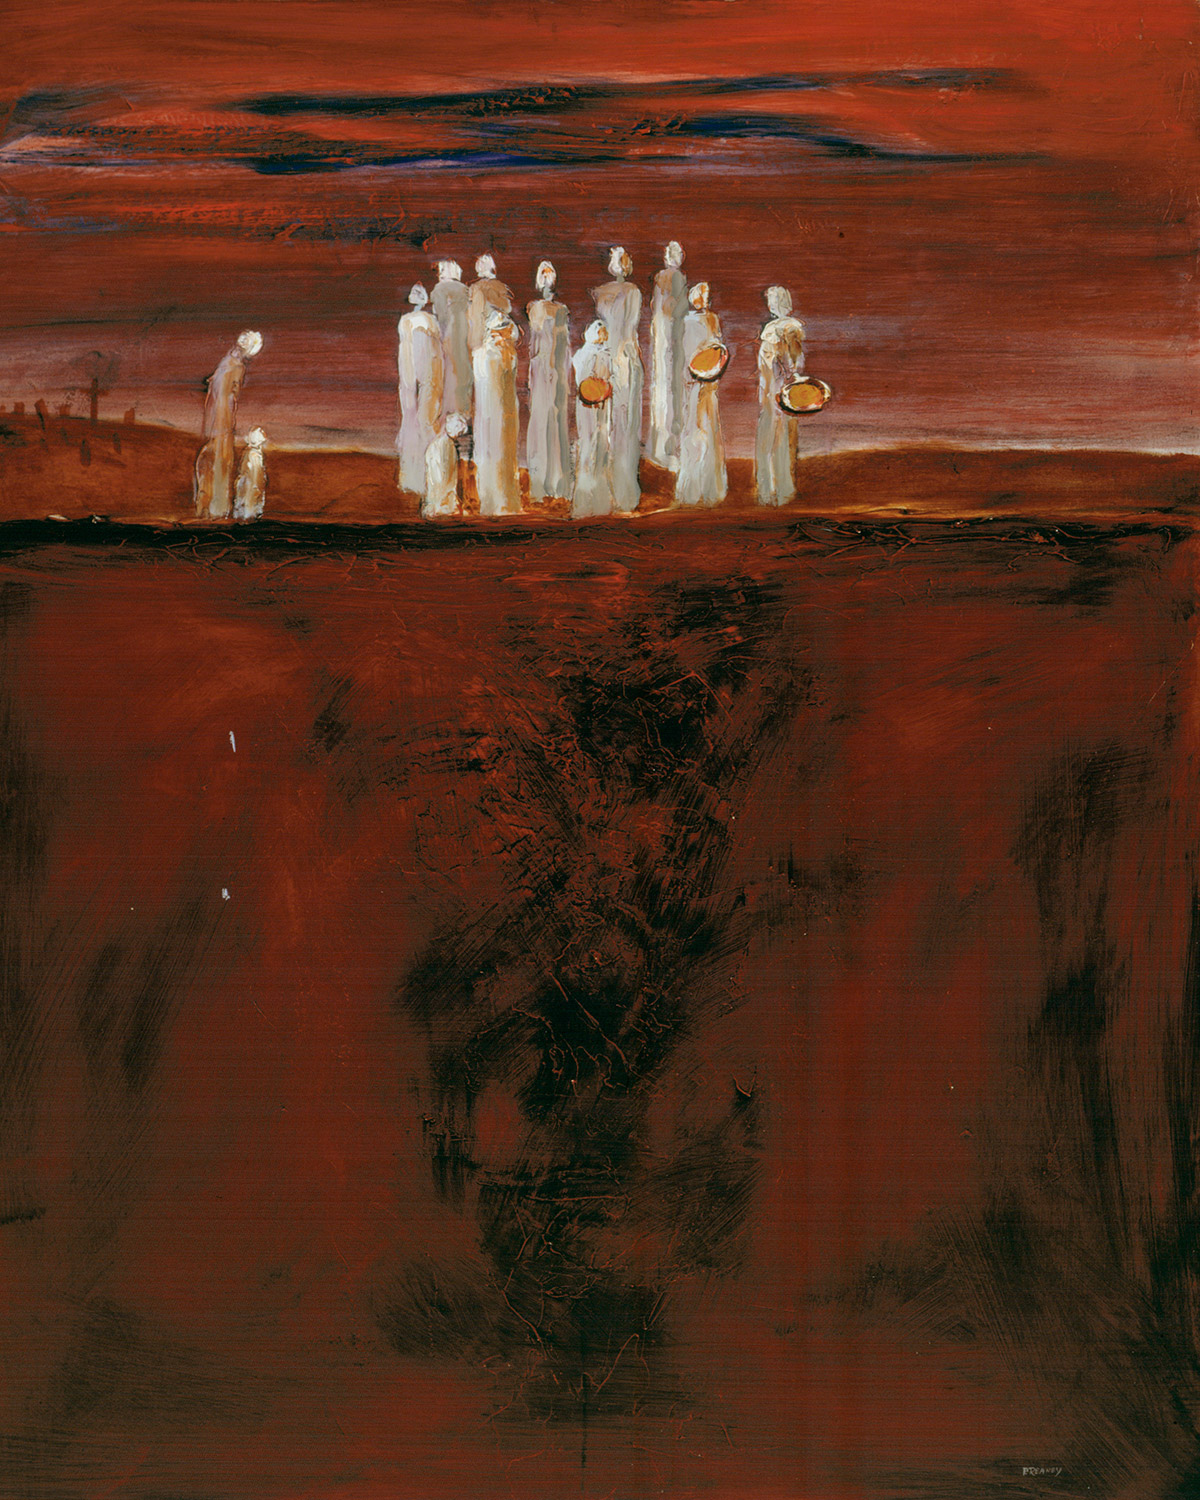 The painting entitled "Departure" by the artist Pádraic Reaney